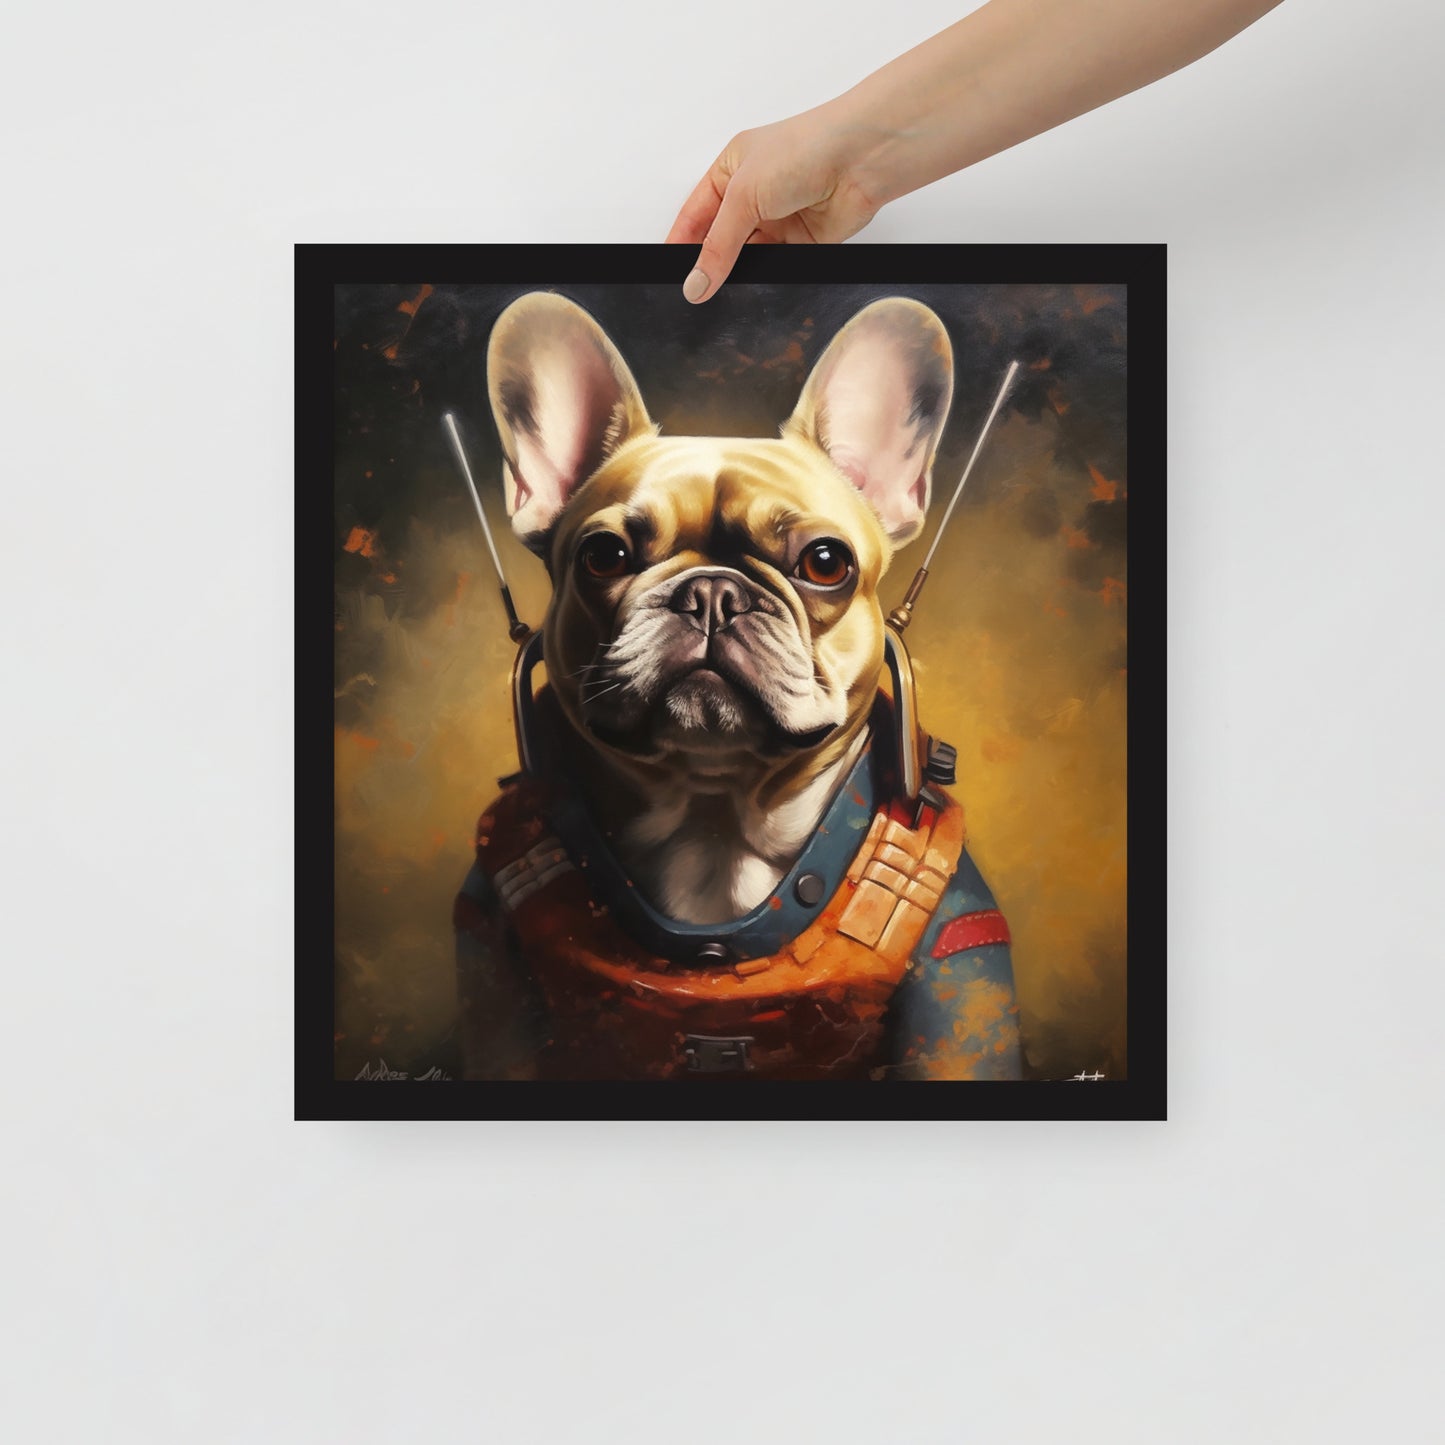 Captivating Frenchie Framed Poster - Essential Dog Lover's Wall Art